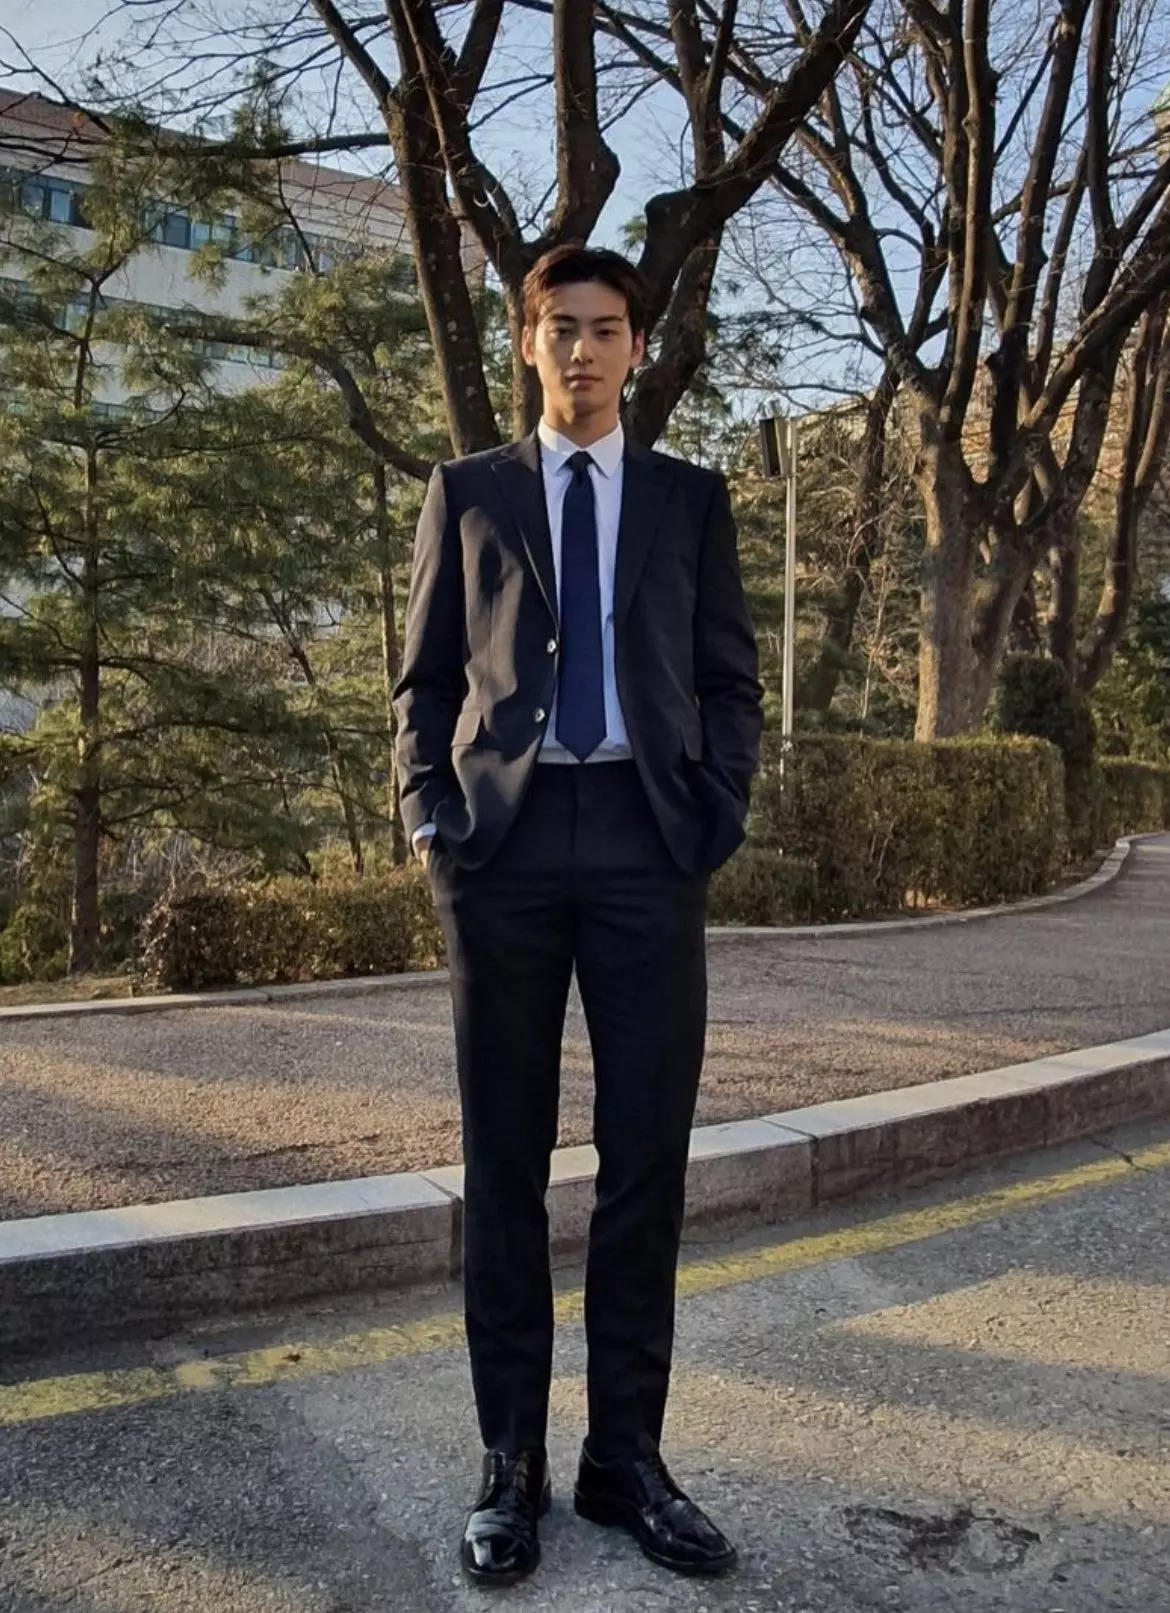 Cha Eun Woo in Suits- A handsome thread